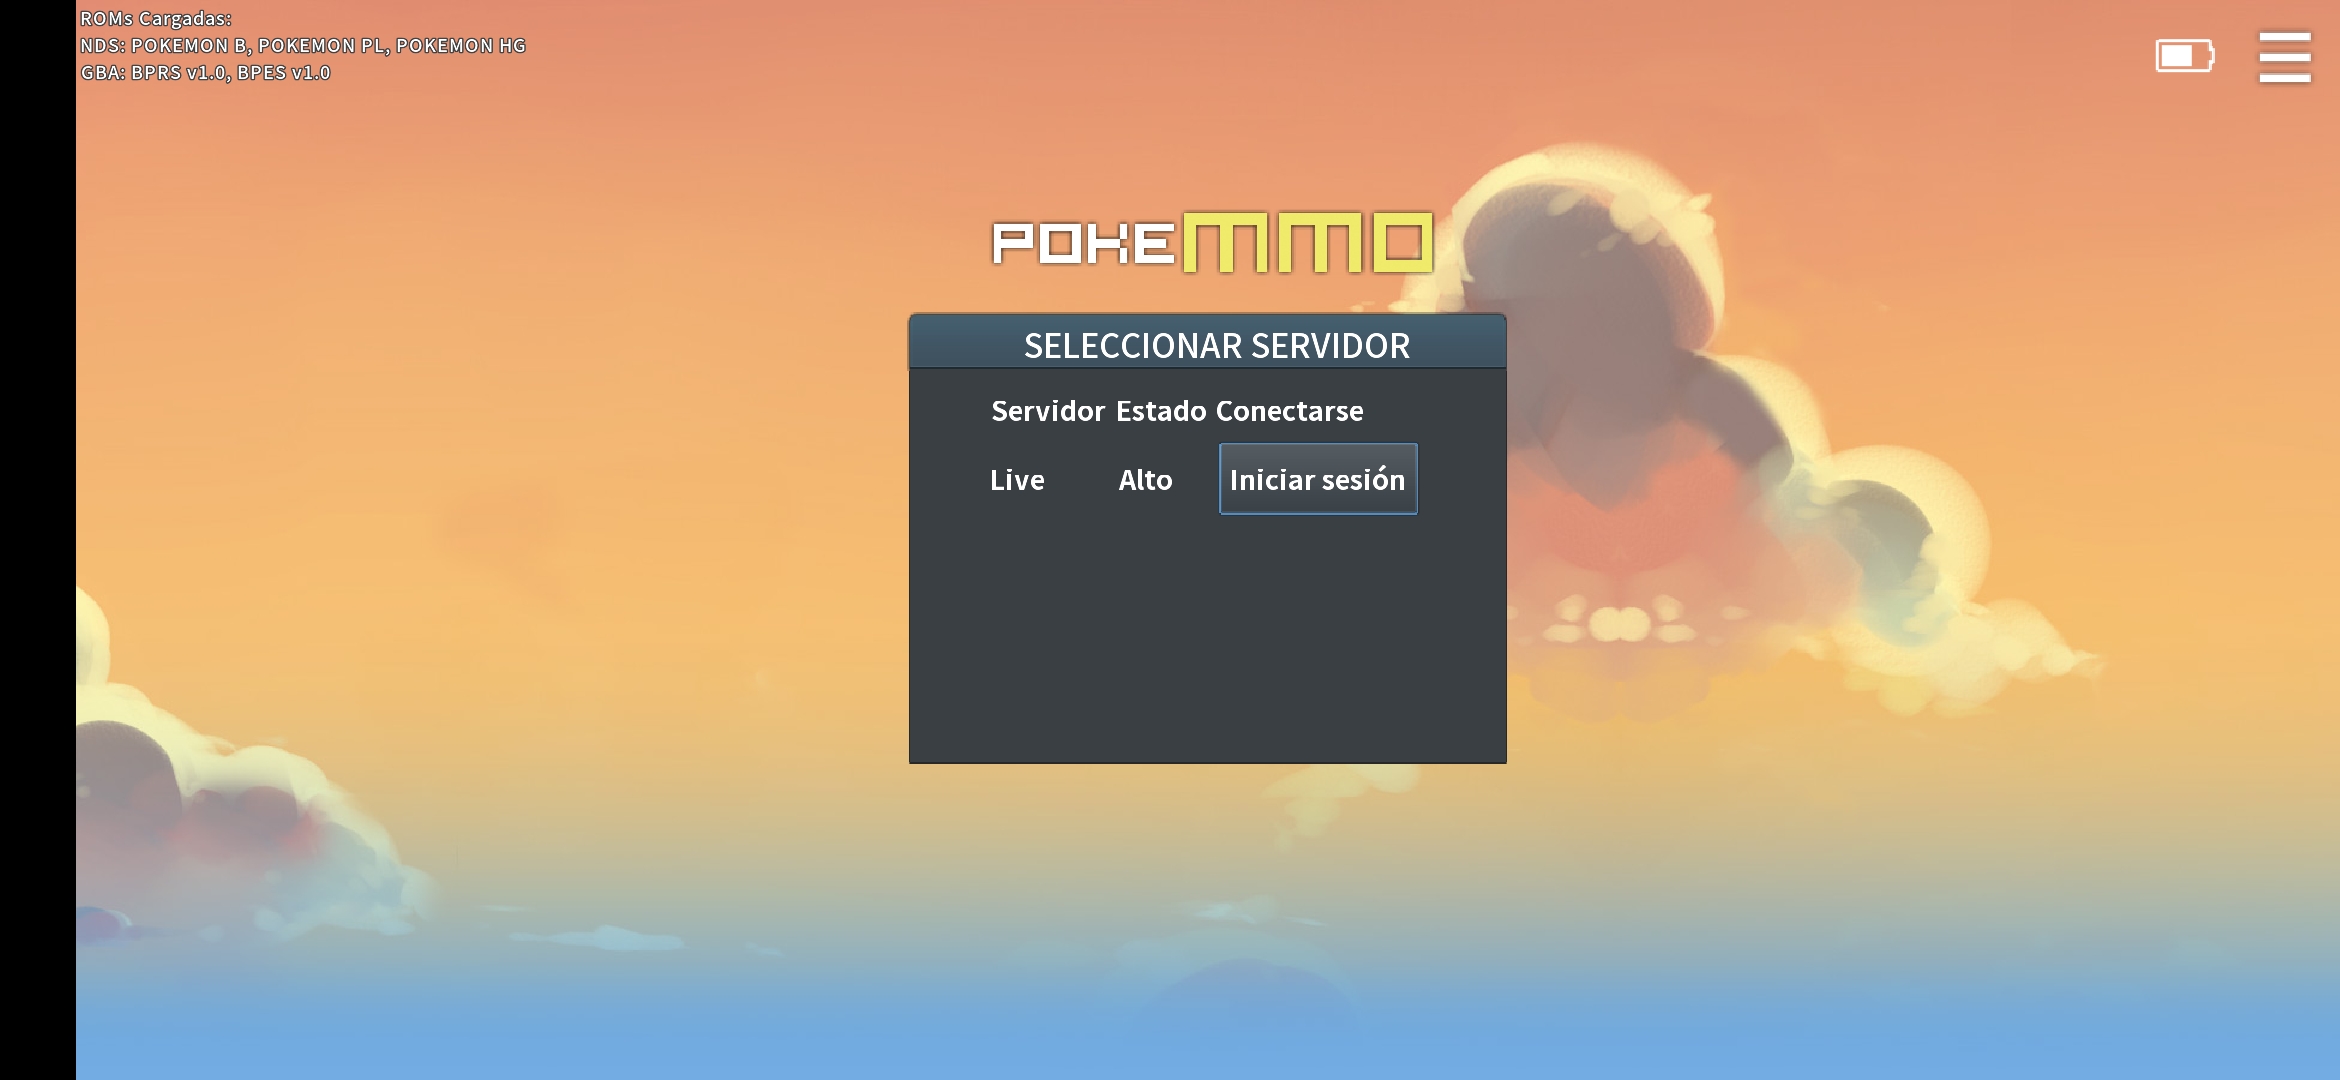 Did something happen with the server ? - General Discussion - PokeMMO